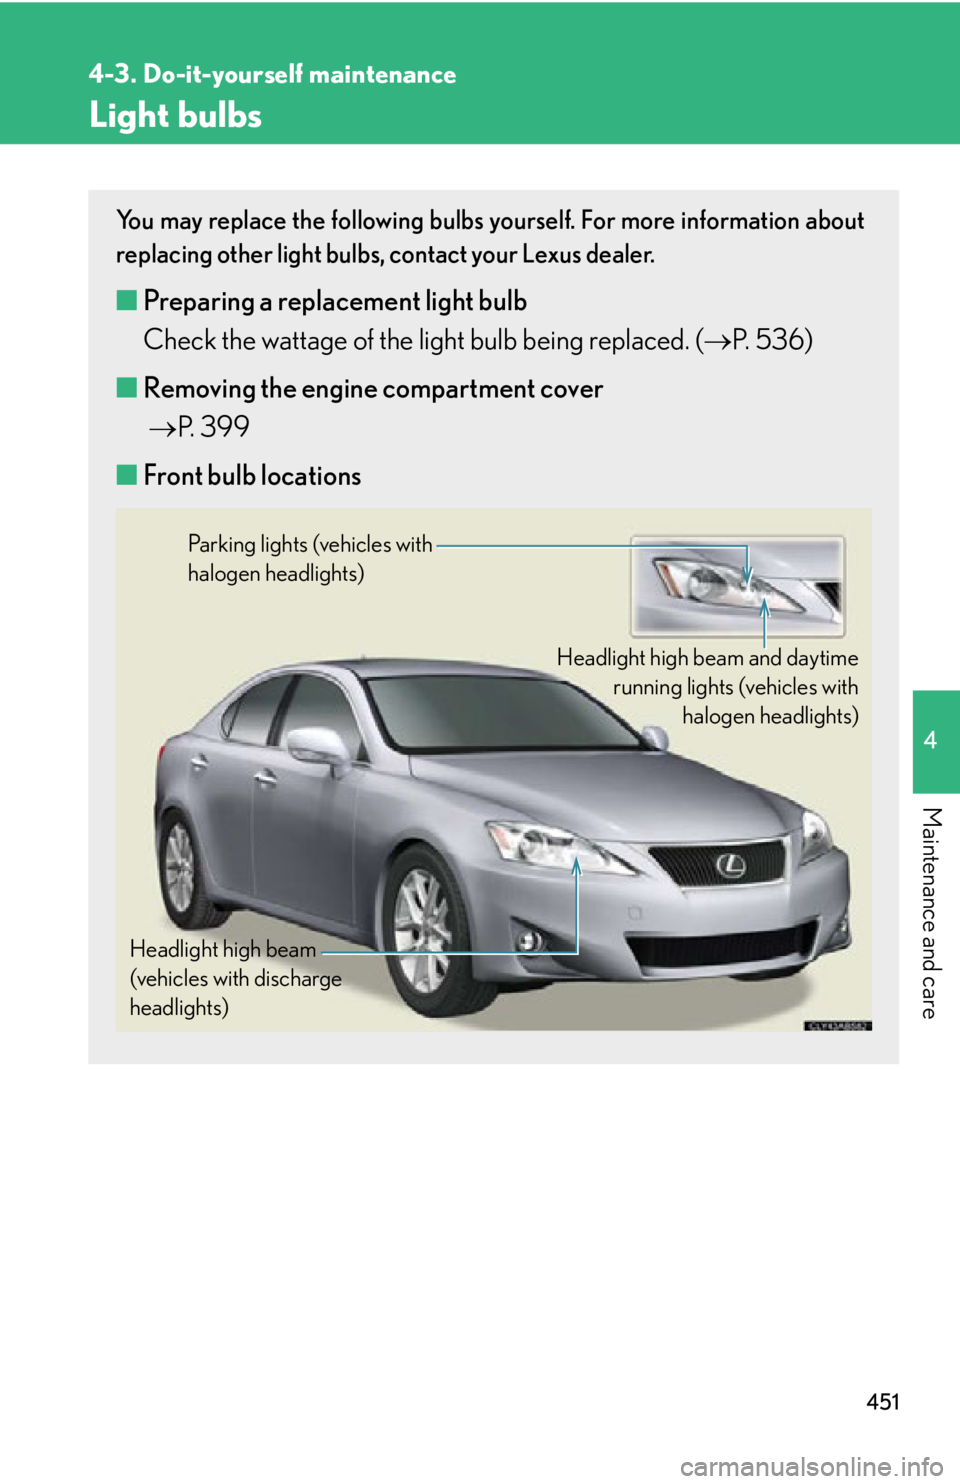 Lexus IS350 2012  Owners Manual / LEXUS 2012 IS250,IS350 OWNERS MANUAL (OM53A87U) 451
4-3. Do-it-yourself maintenance
4
Maintenance and care
Light bulbs
You may replace the following bulbs yourself. For more information about
replacing other light bulbs, contact your Lexus dealer.
